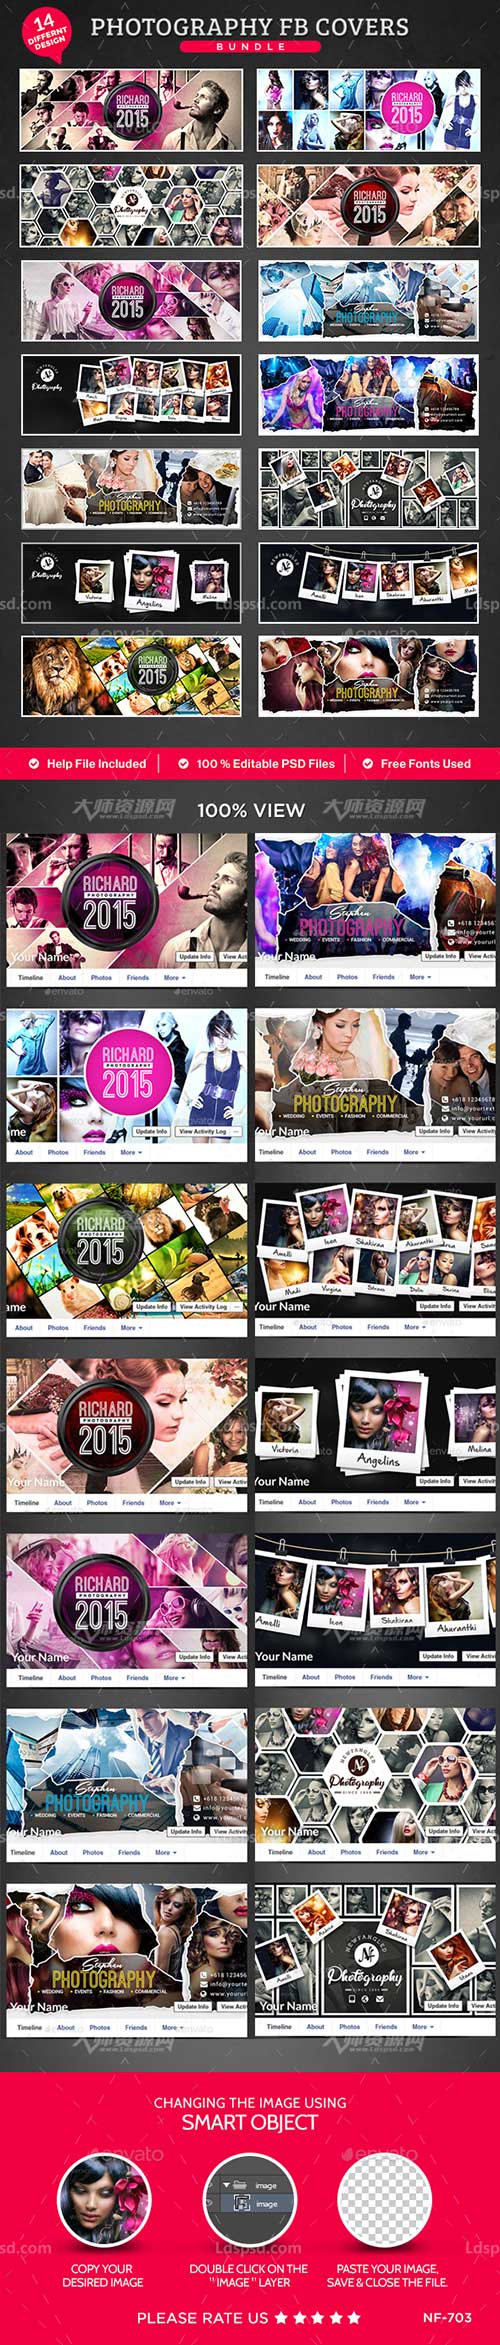 Photography Facebook Cover Bundle 14 Designs,14个精美的图像框架模板